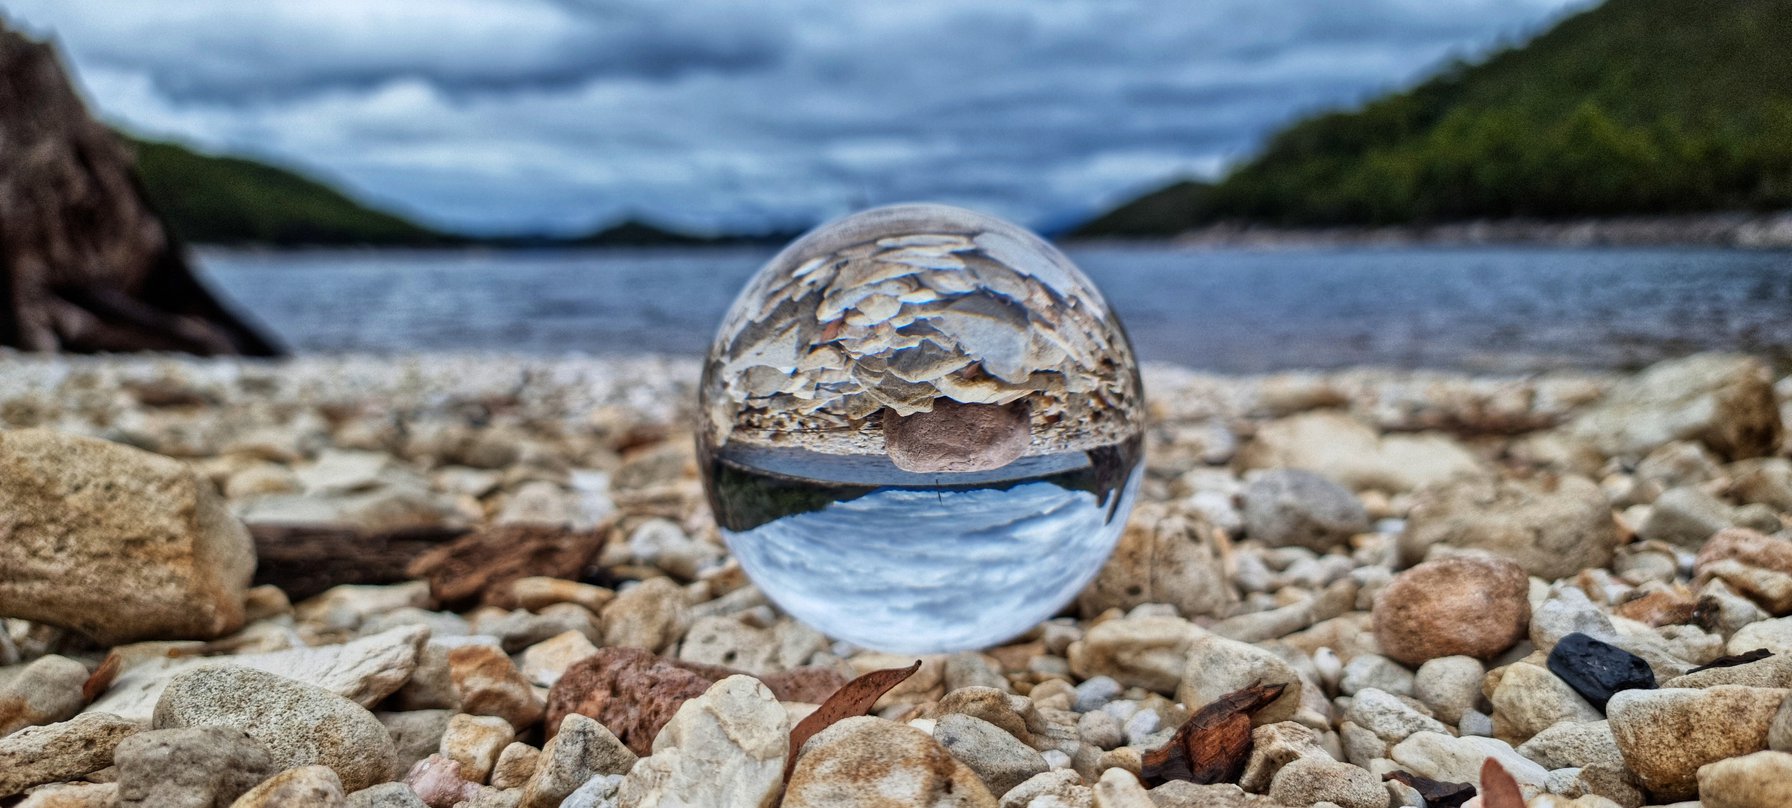 A photography artwork by Simon Geason. The shot is of a pale rock beach with a lake and cloudy blue sky in the background. Upon the rocks is a clear marble that is reflecting the scene within its body but completely upside down. Credit Simon Geason.